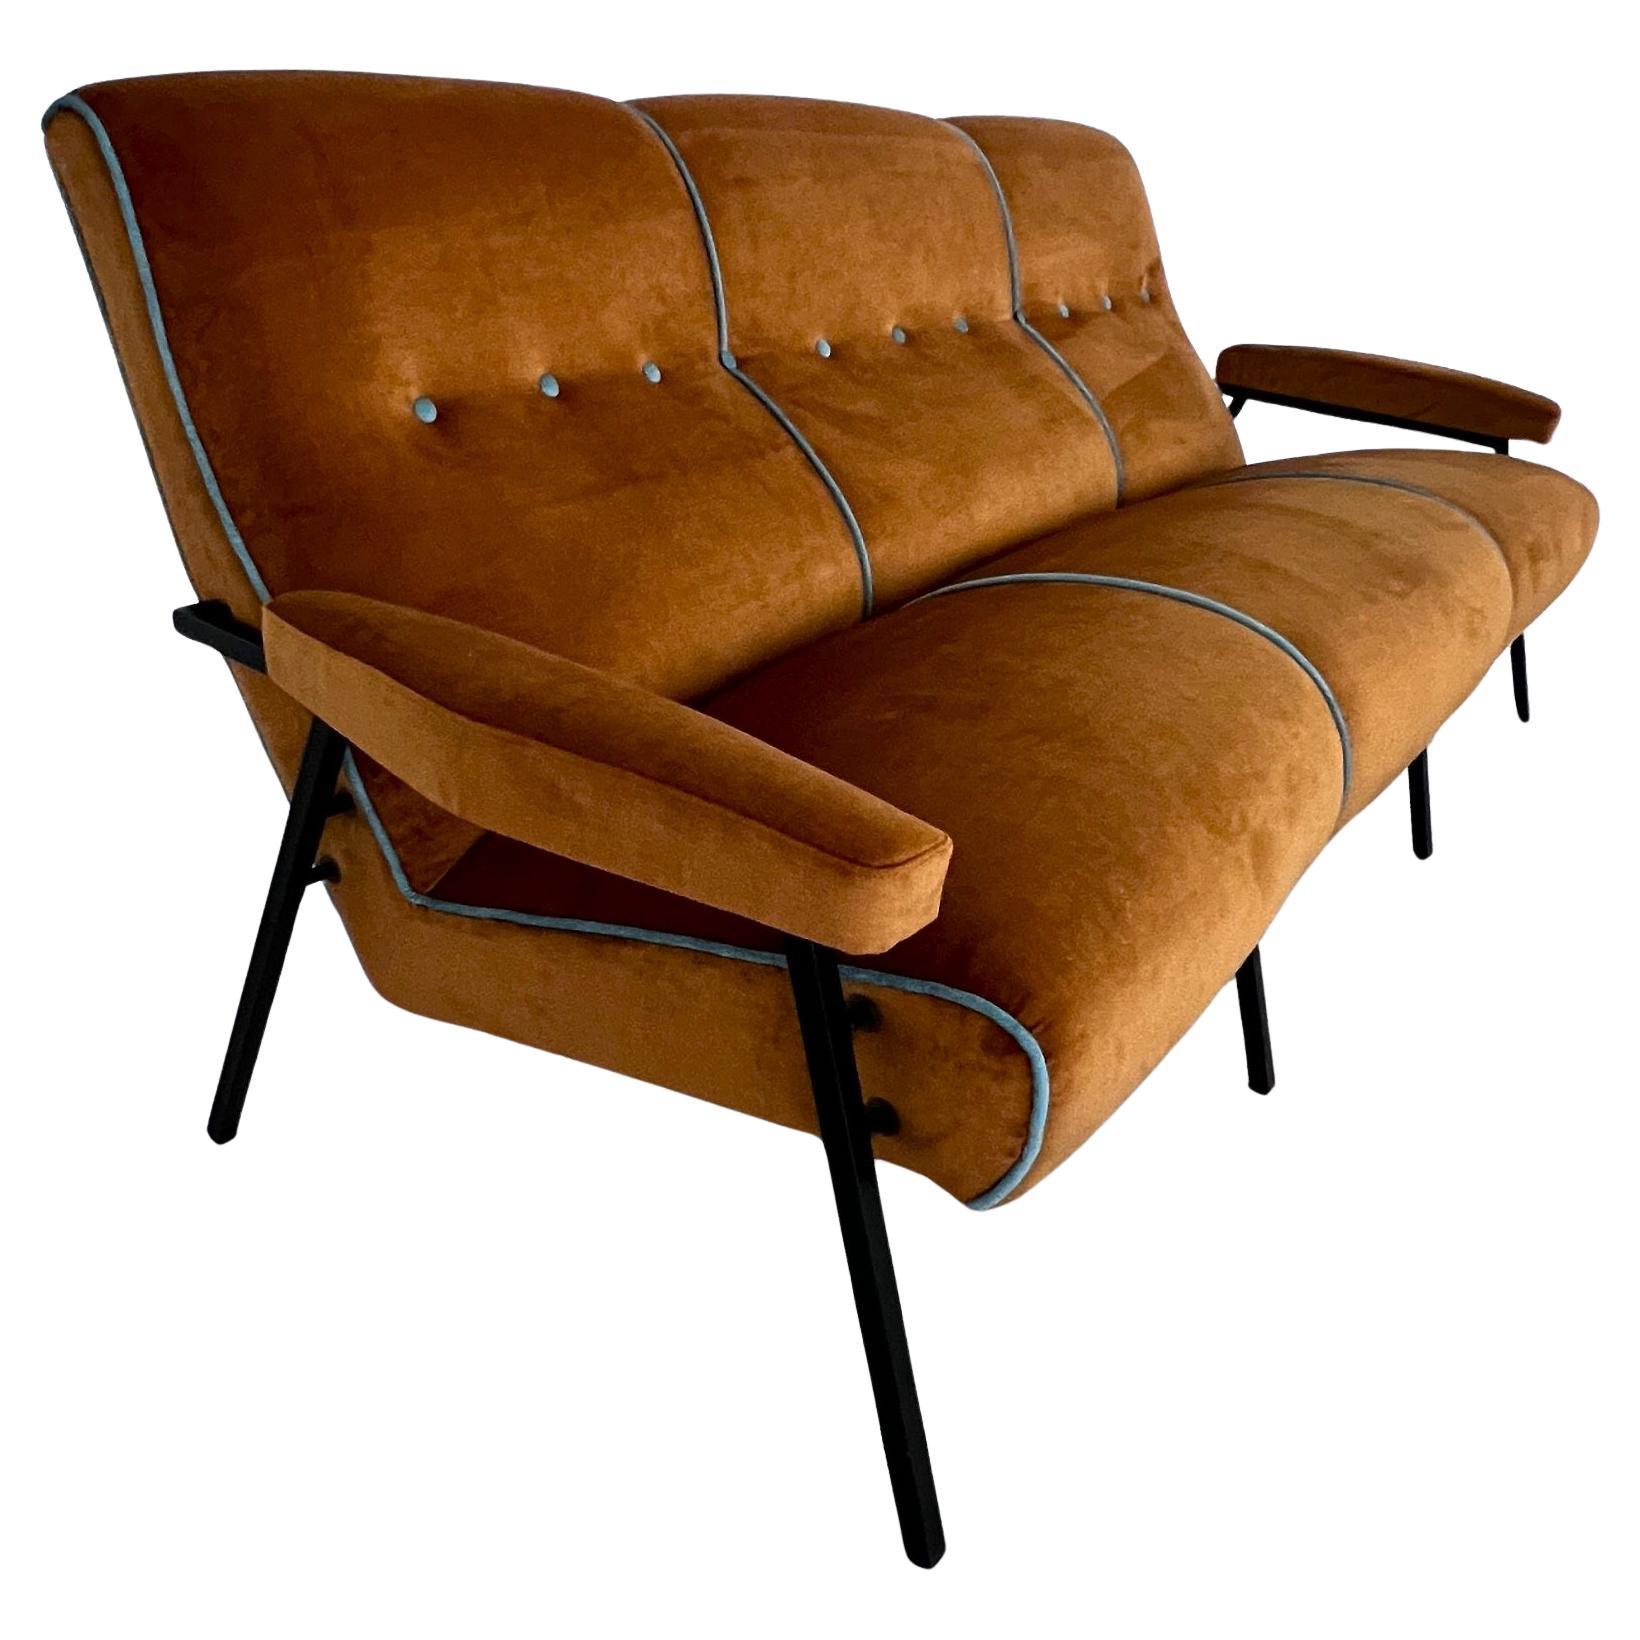 Elegant Italian sofa, produced in the 60s with the typical square metal legs.
The sofa has been completely refurbished and reupholstered with high-quality interior material and super-soft easy-care velvet on the outside.
The color is a warm